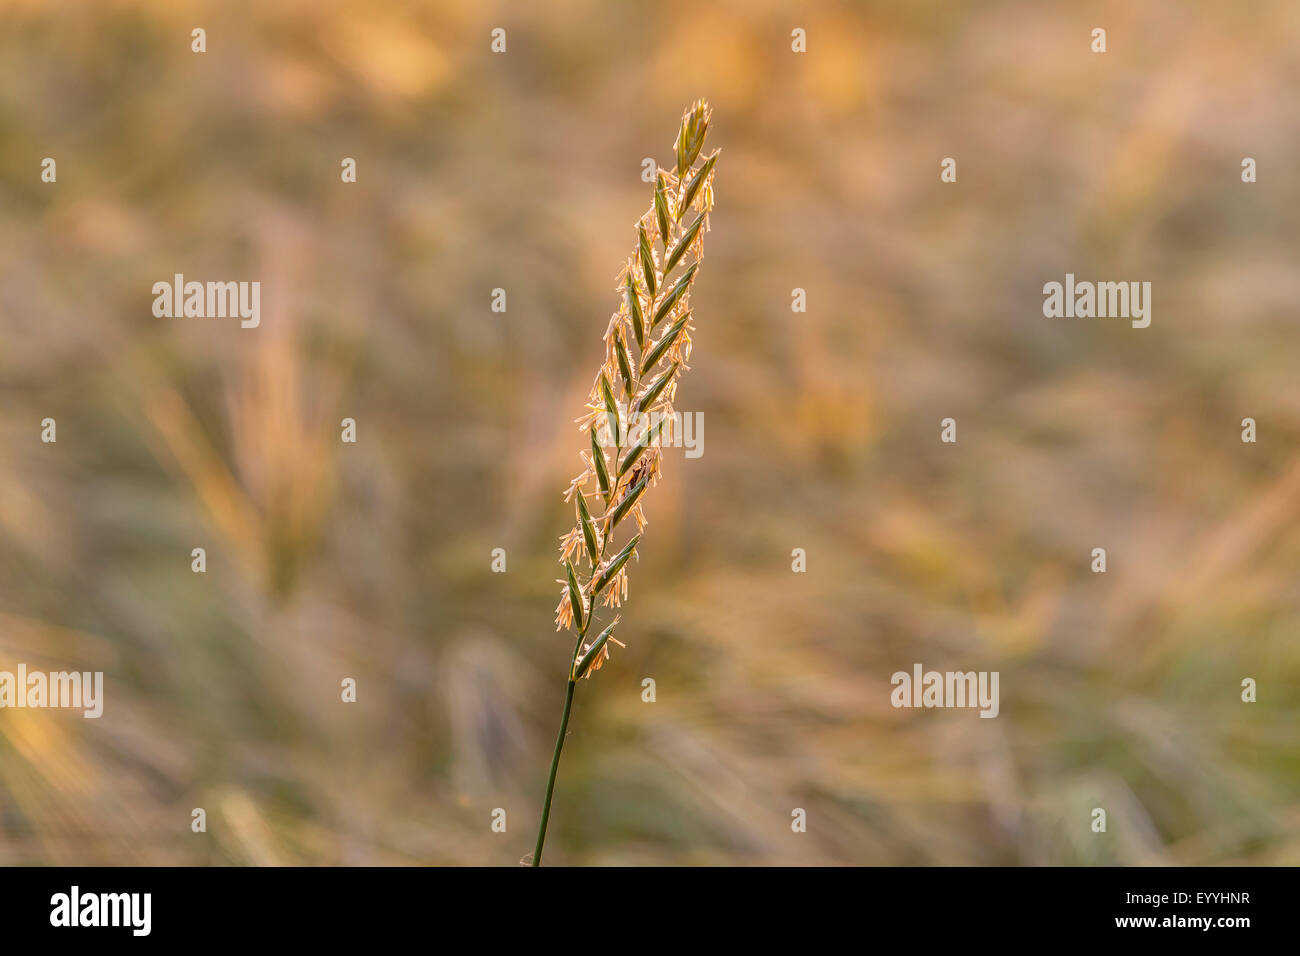 Couch grass, twitch, quick grass, quitch grass, quitch, dog grass, quackgrass, scutch grass, witchgrass (Agropyron repens, Elymus repens), grain ear in evening light, Germany, North Rhine-Westphalia Stock Photo